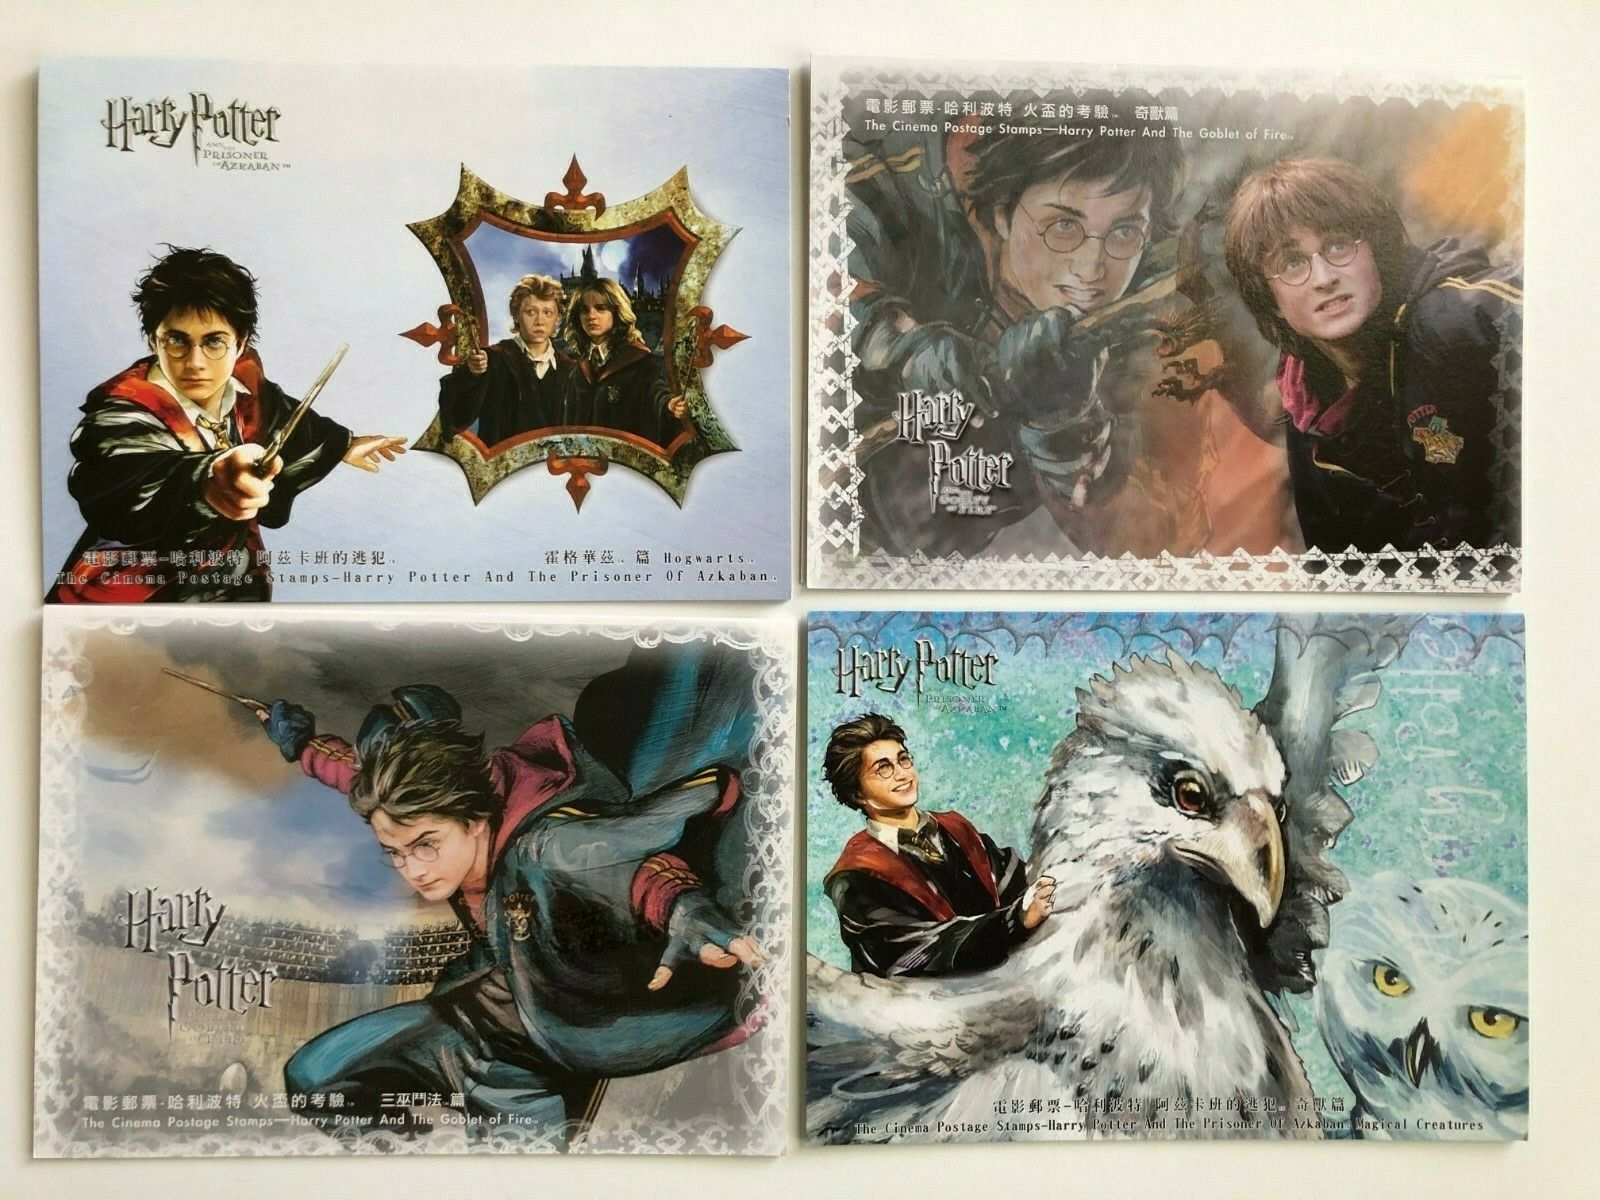 China Taiwan Roc Harry Potter Postage Stamp Sheets Lot Of 4 (2004-2005) Mnh